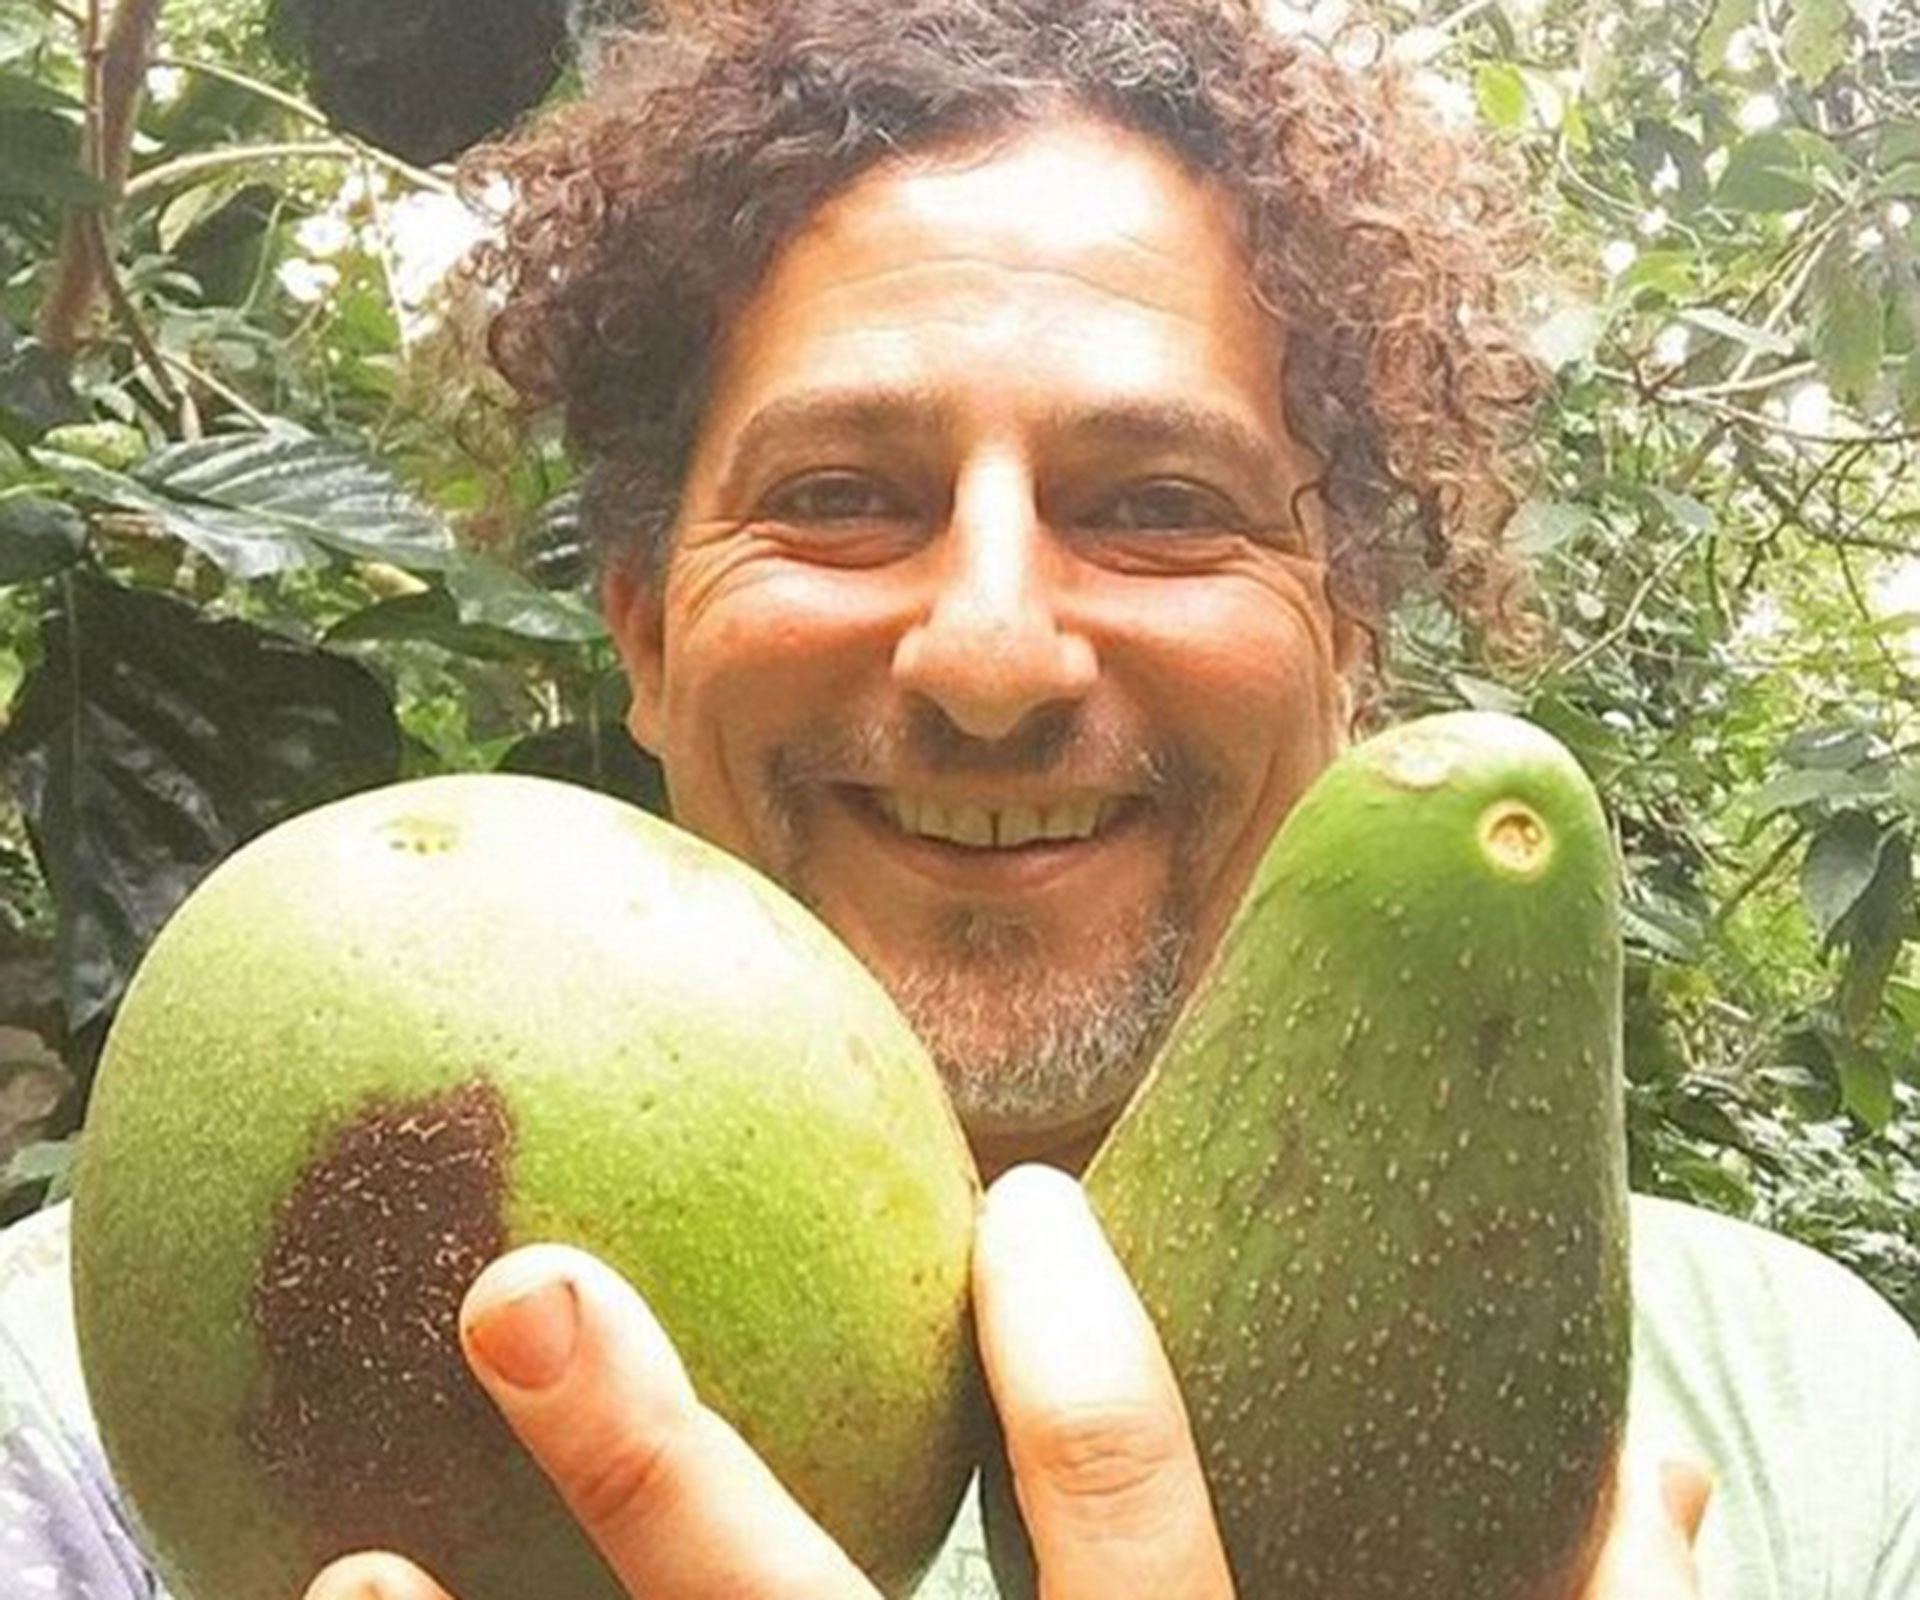 Notorious anti-vaxxer David ‘Avocado’ is doing workshops all over Australia and people are furious